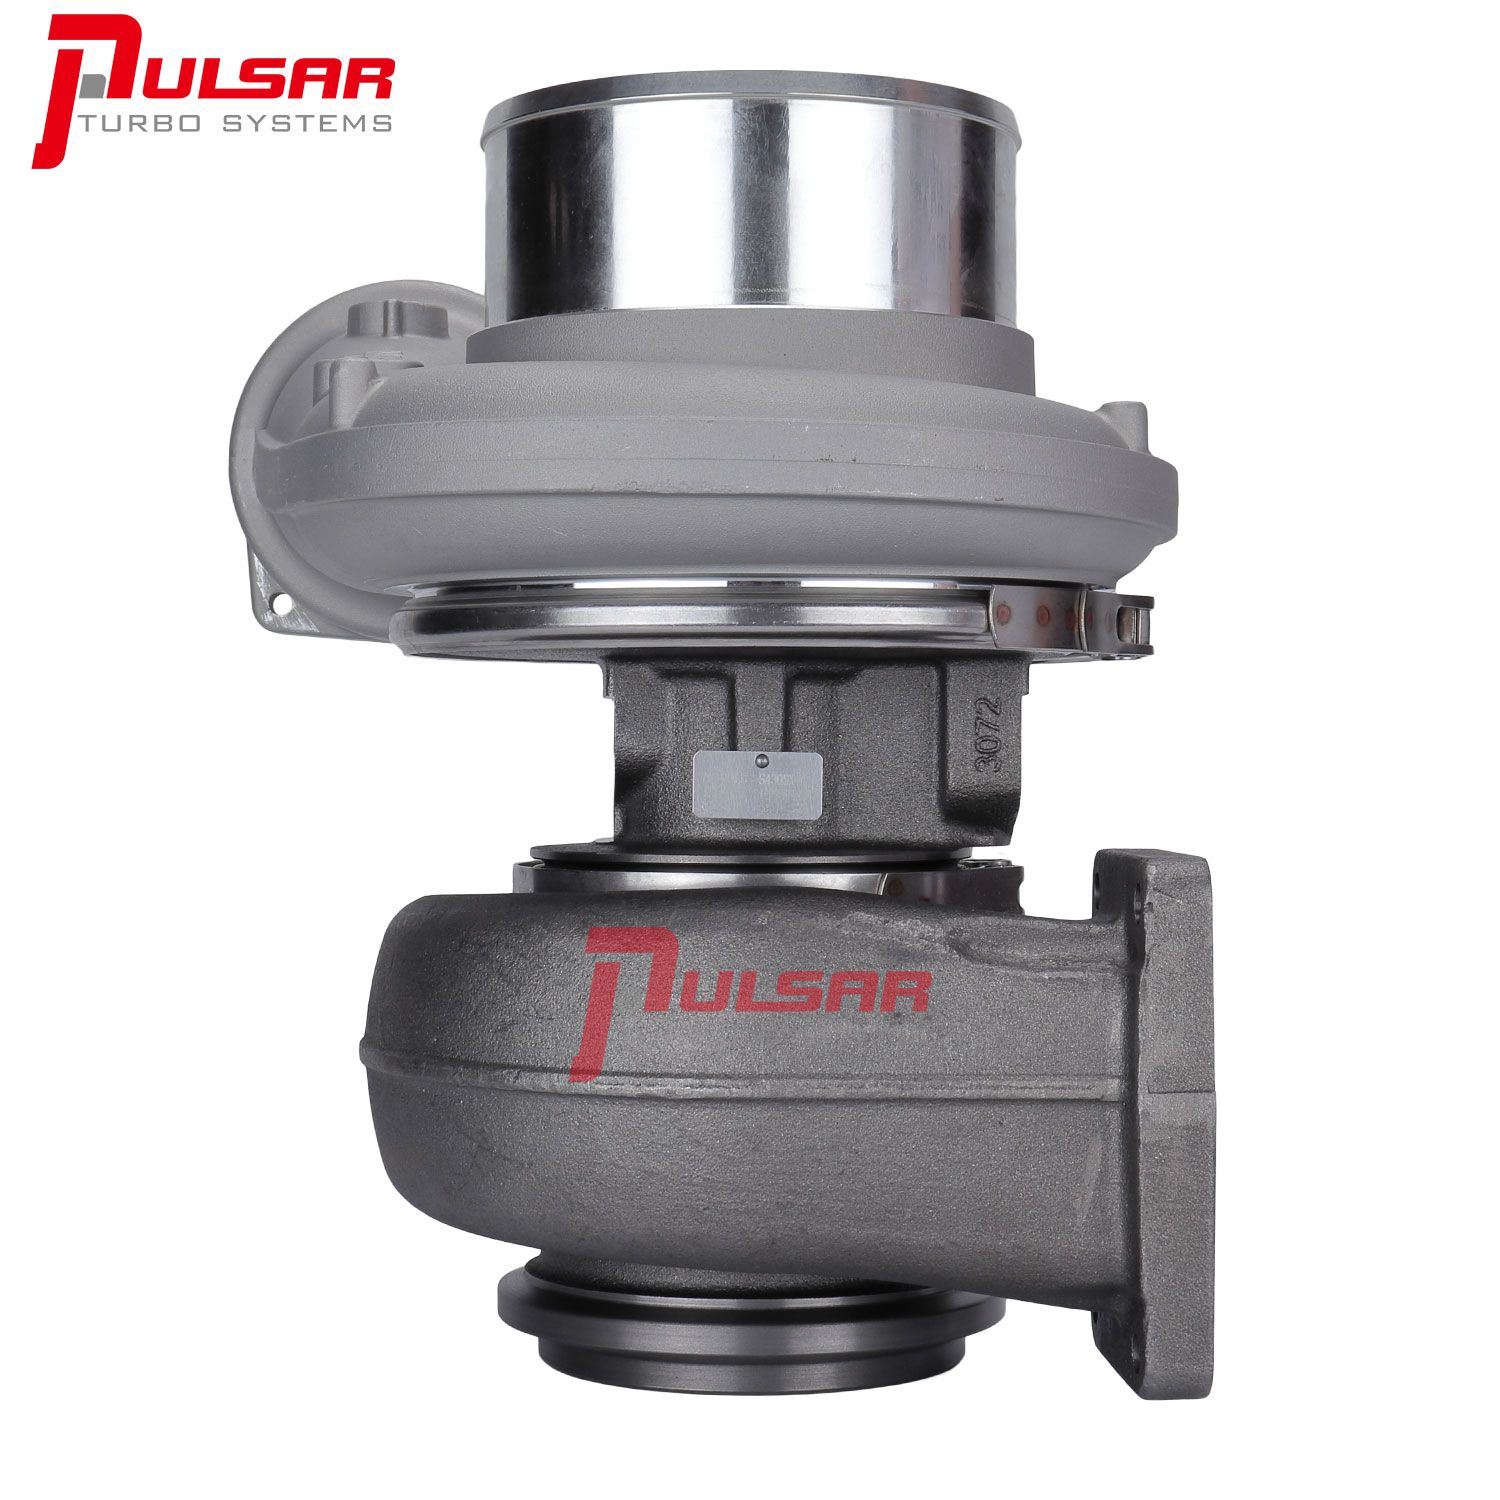 PULSAR Stage1 Upgrade S478 Turbo for CAT 3406E C15 Engine